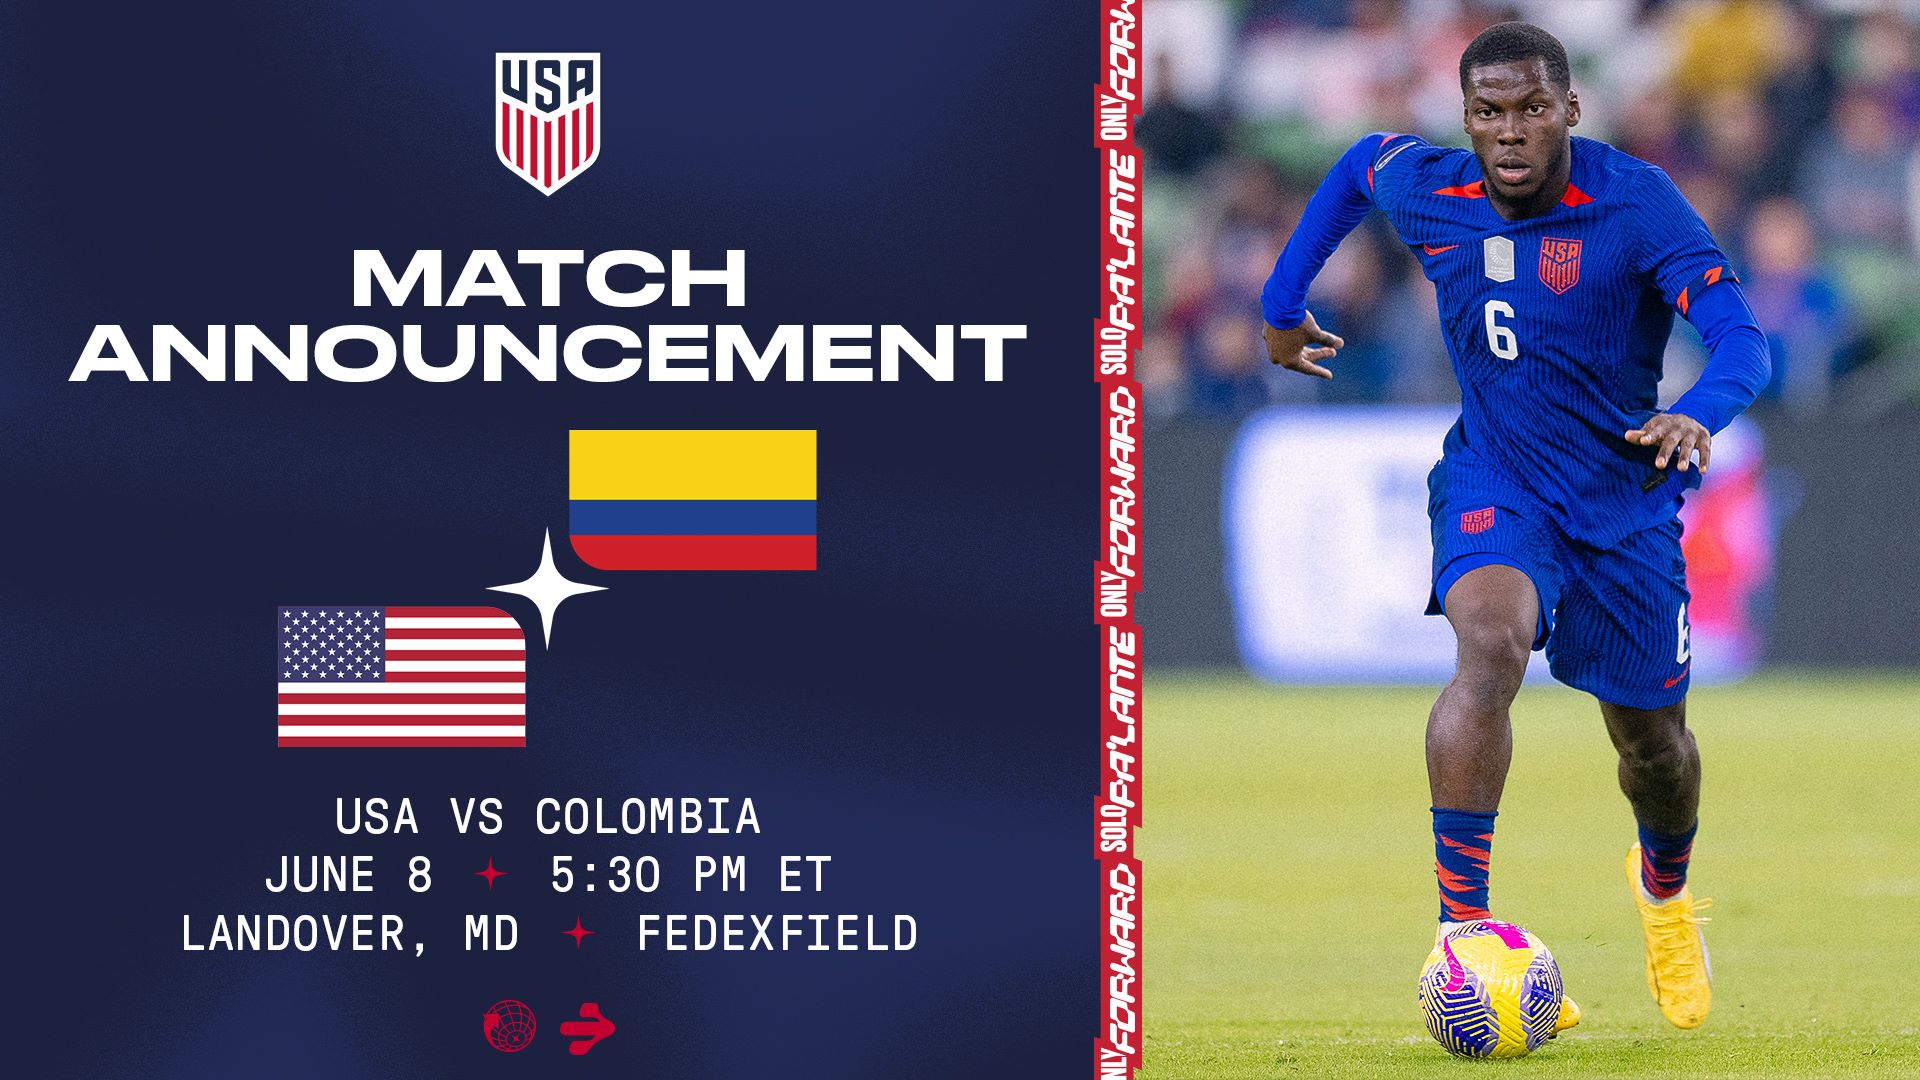 The United States Men's National Team returns to the Washington, D.C. area to face Colombia on June 8 at FedExField